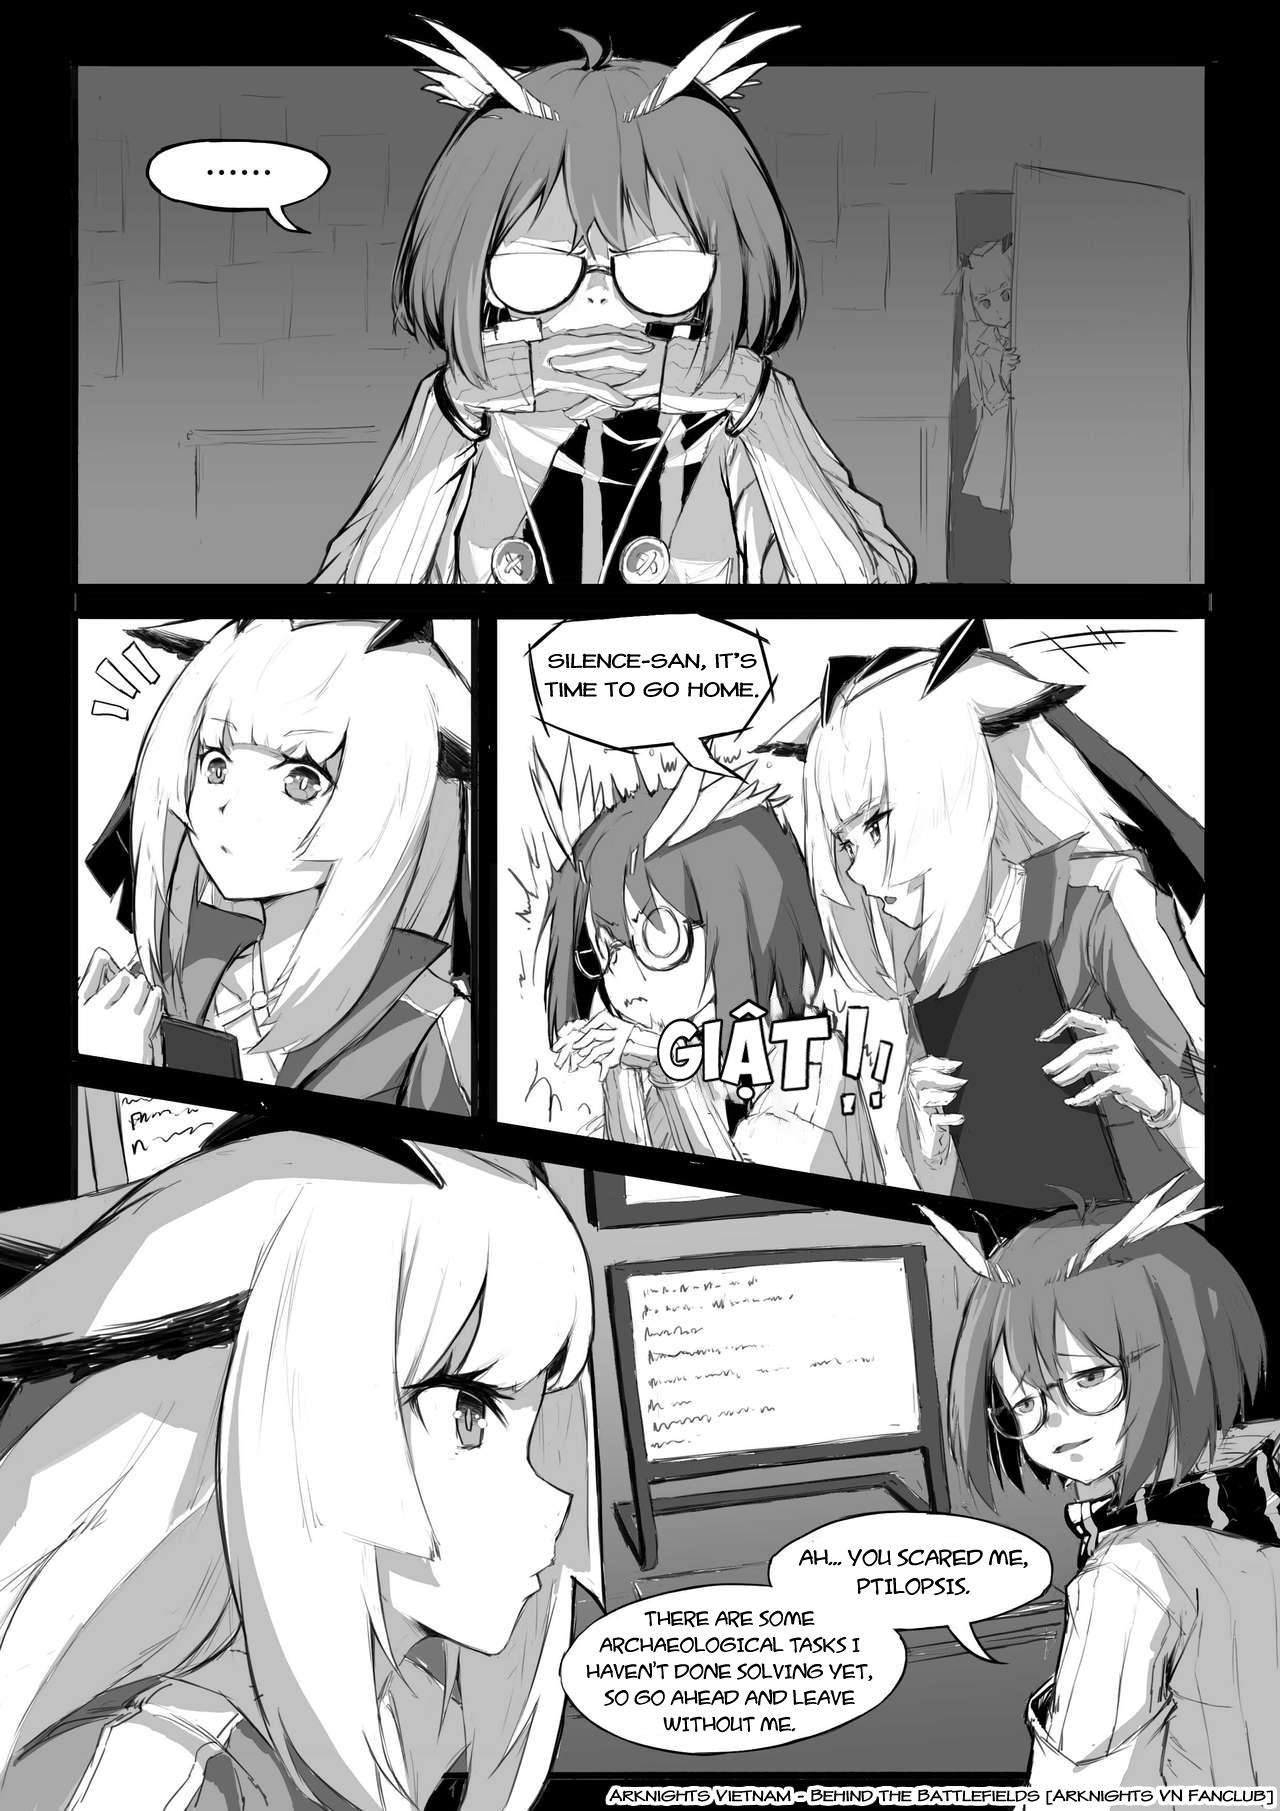 Boyfriend The Story Where Ptilopsis Becomes A Very Little Girl - Arknights Que - Page 2